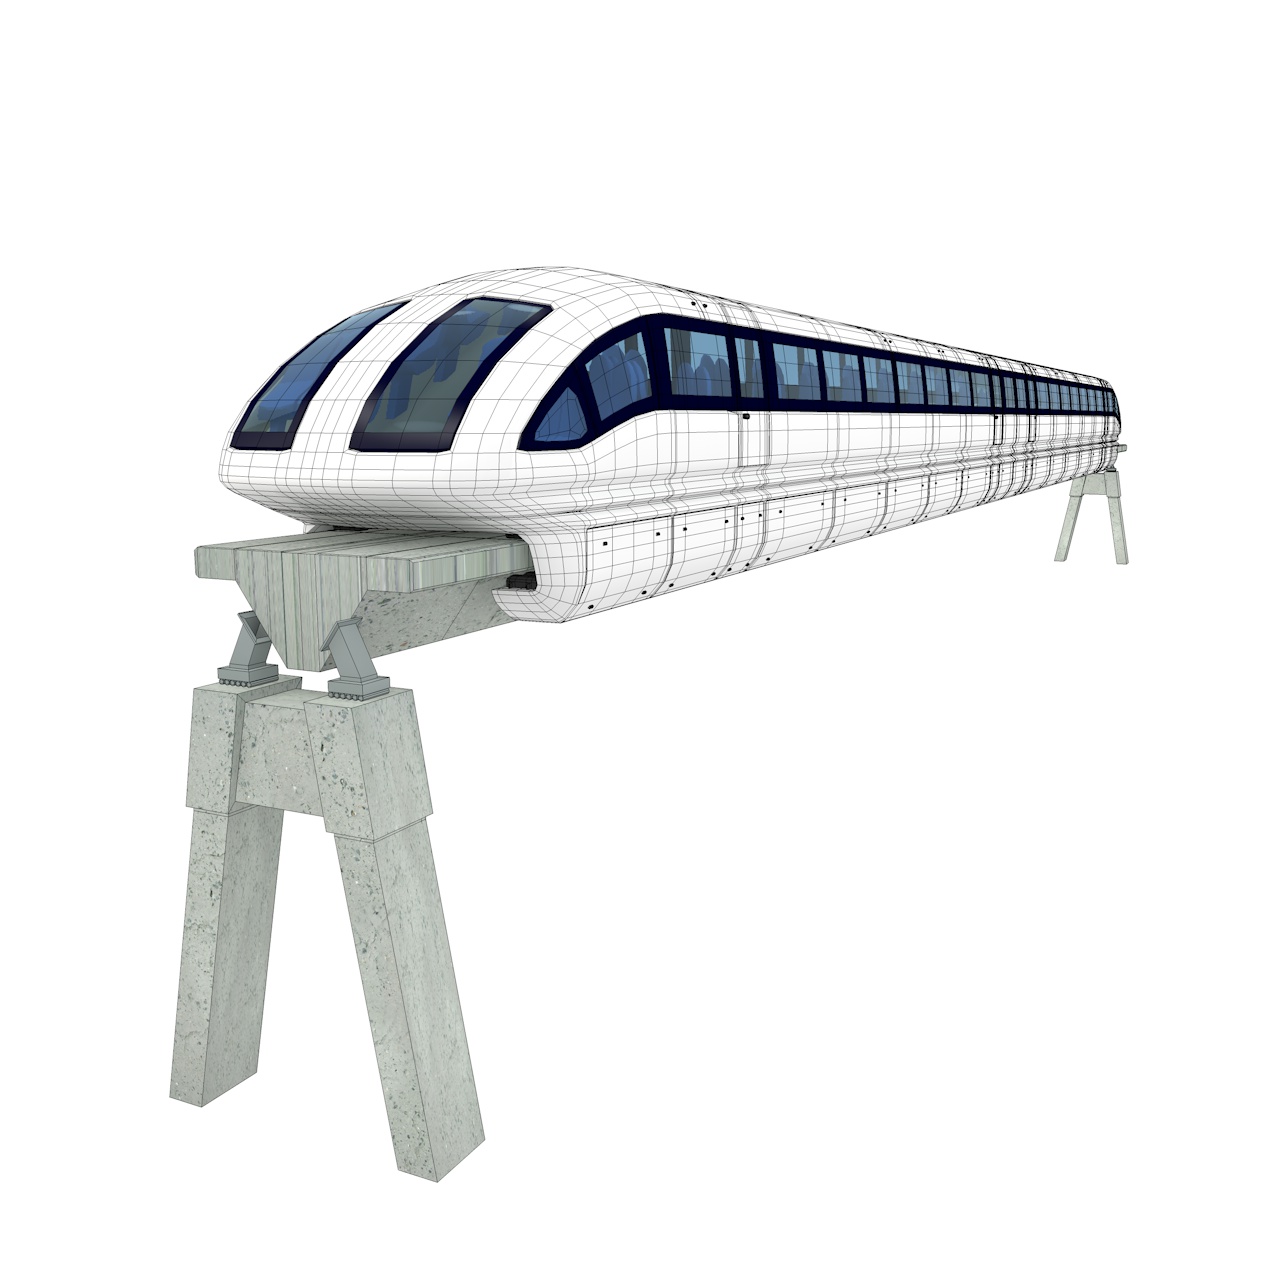 Maglev Train with Monorail 3d model